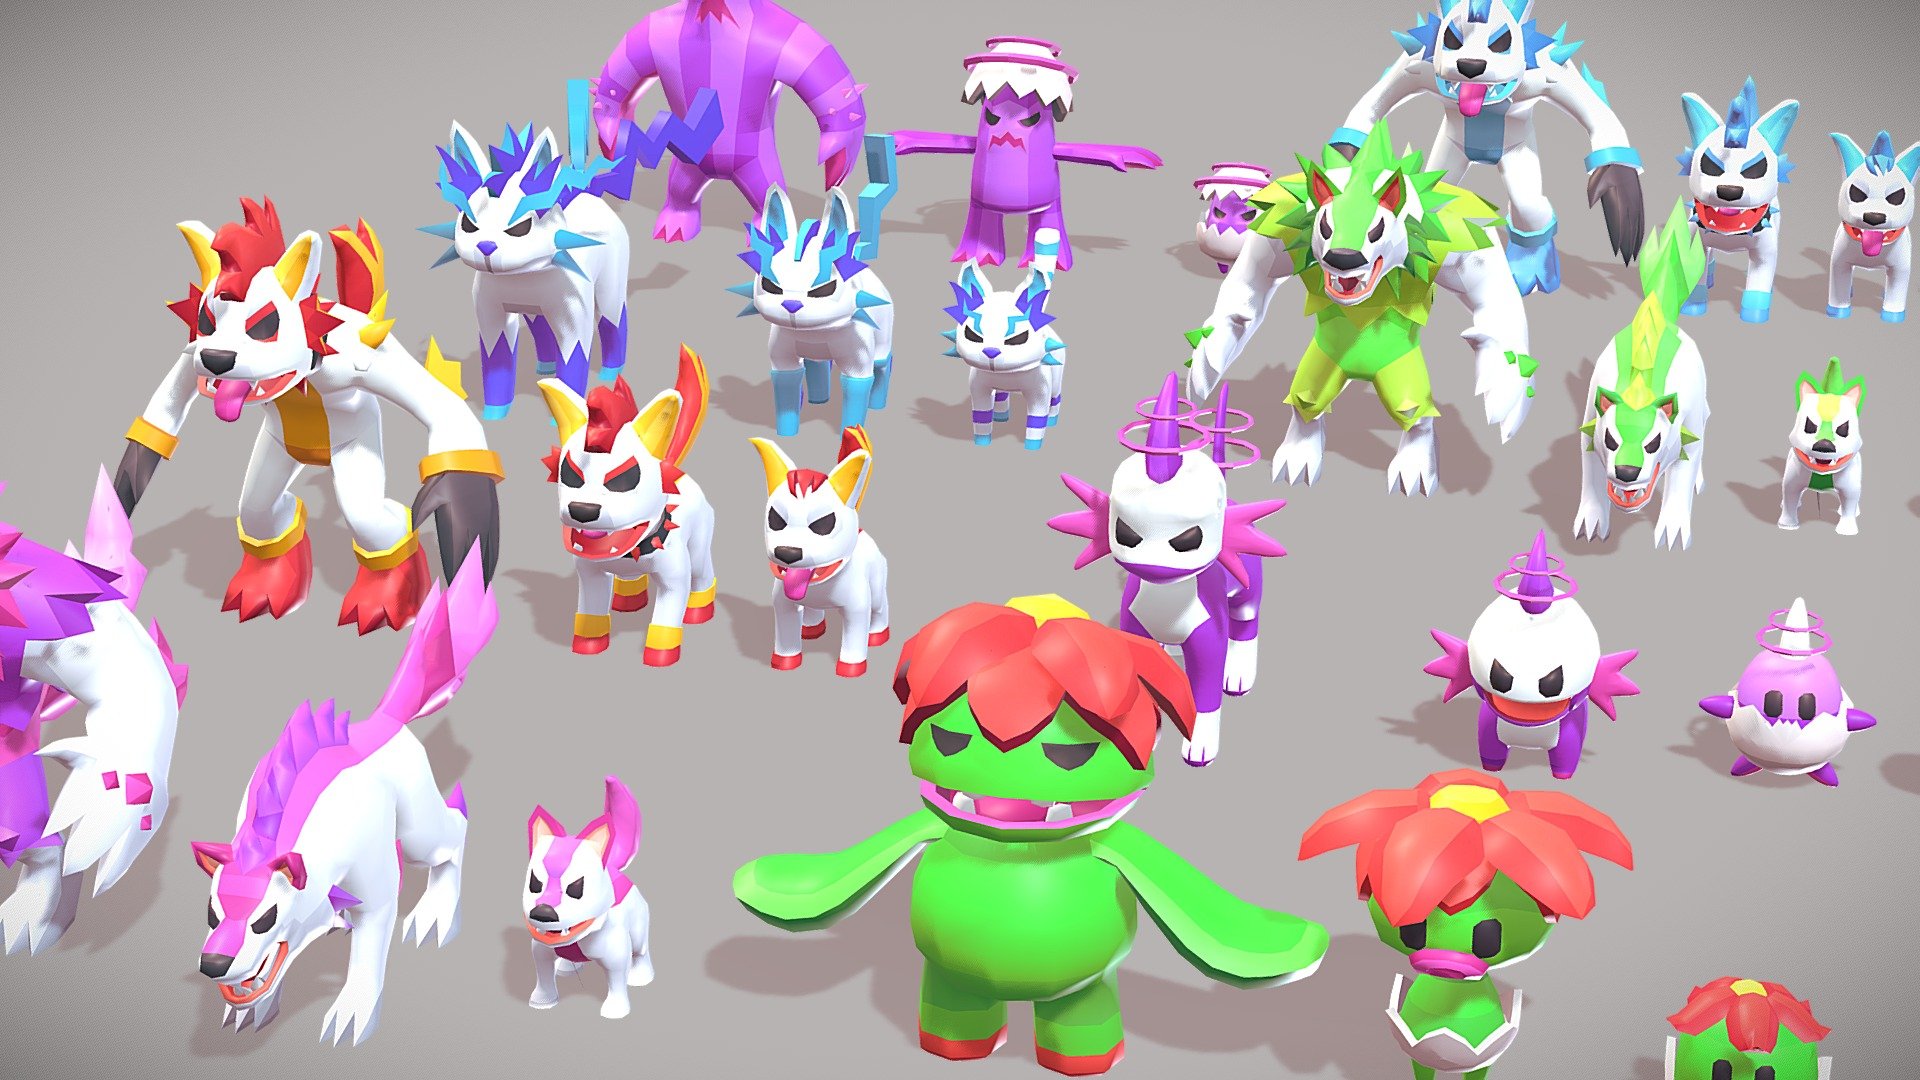 Rigged monsters - pokemons 
done on blender ready for game

Animations are sent in private for an extra fee .

Thank you - Rigged monsters - pokemon creatures - 3D model by haykel-shaba (@haykel1993) 3d model